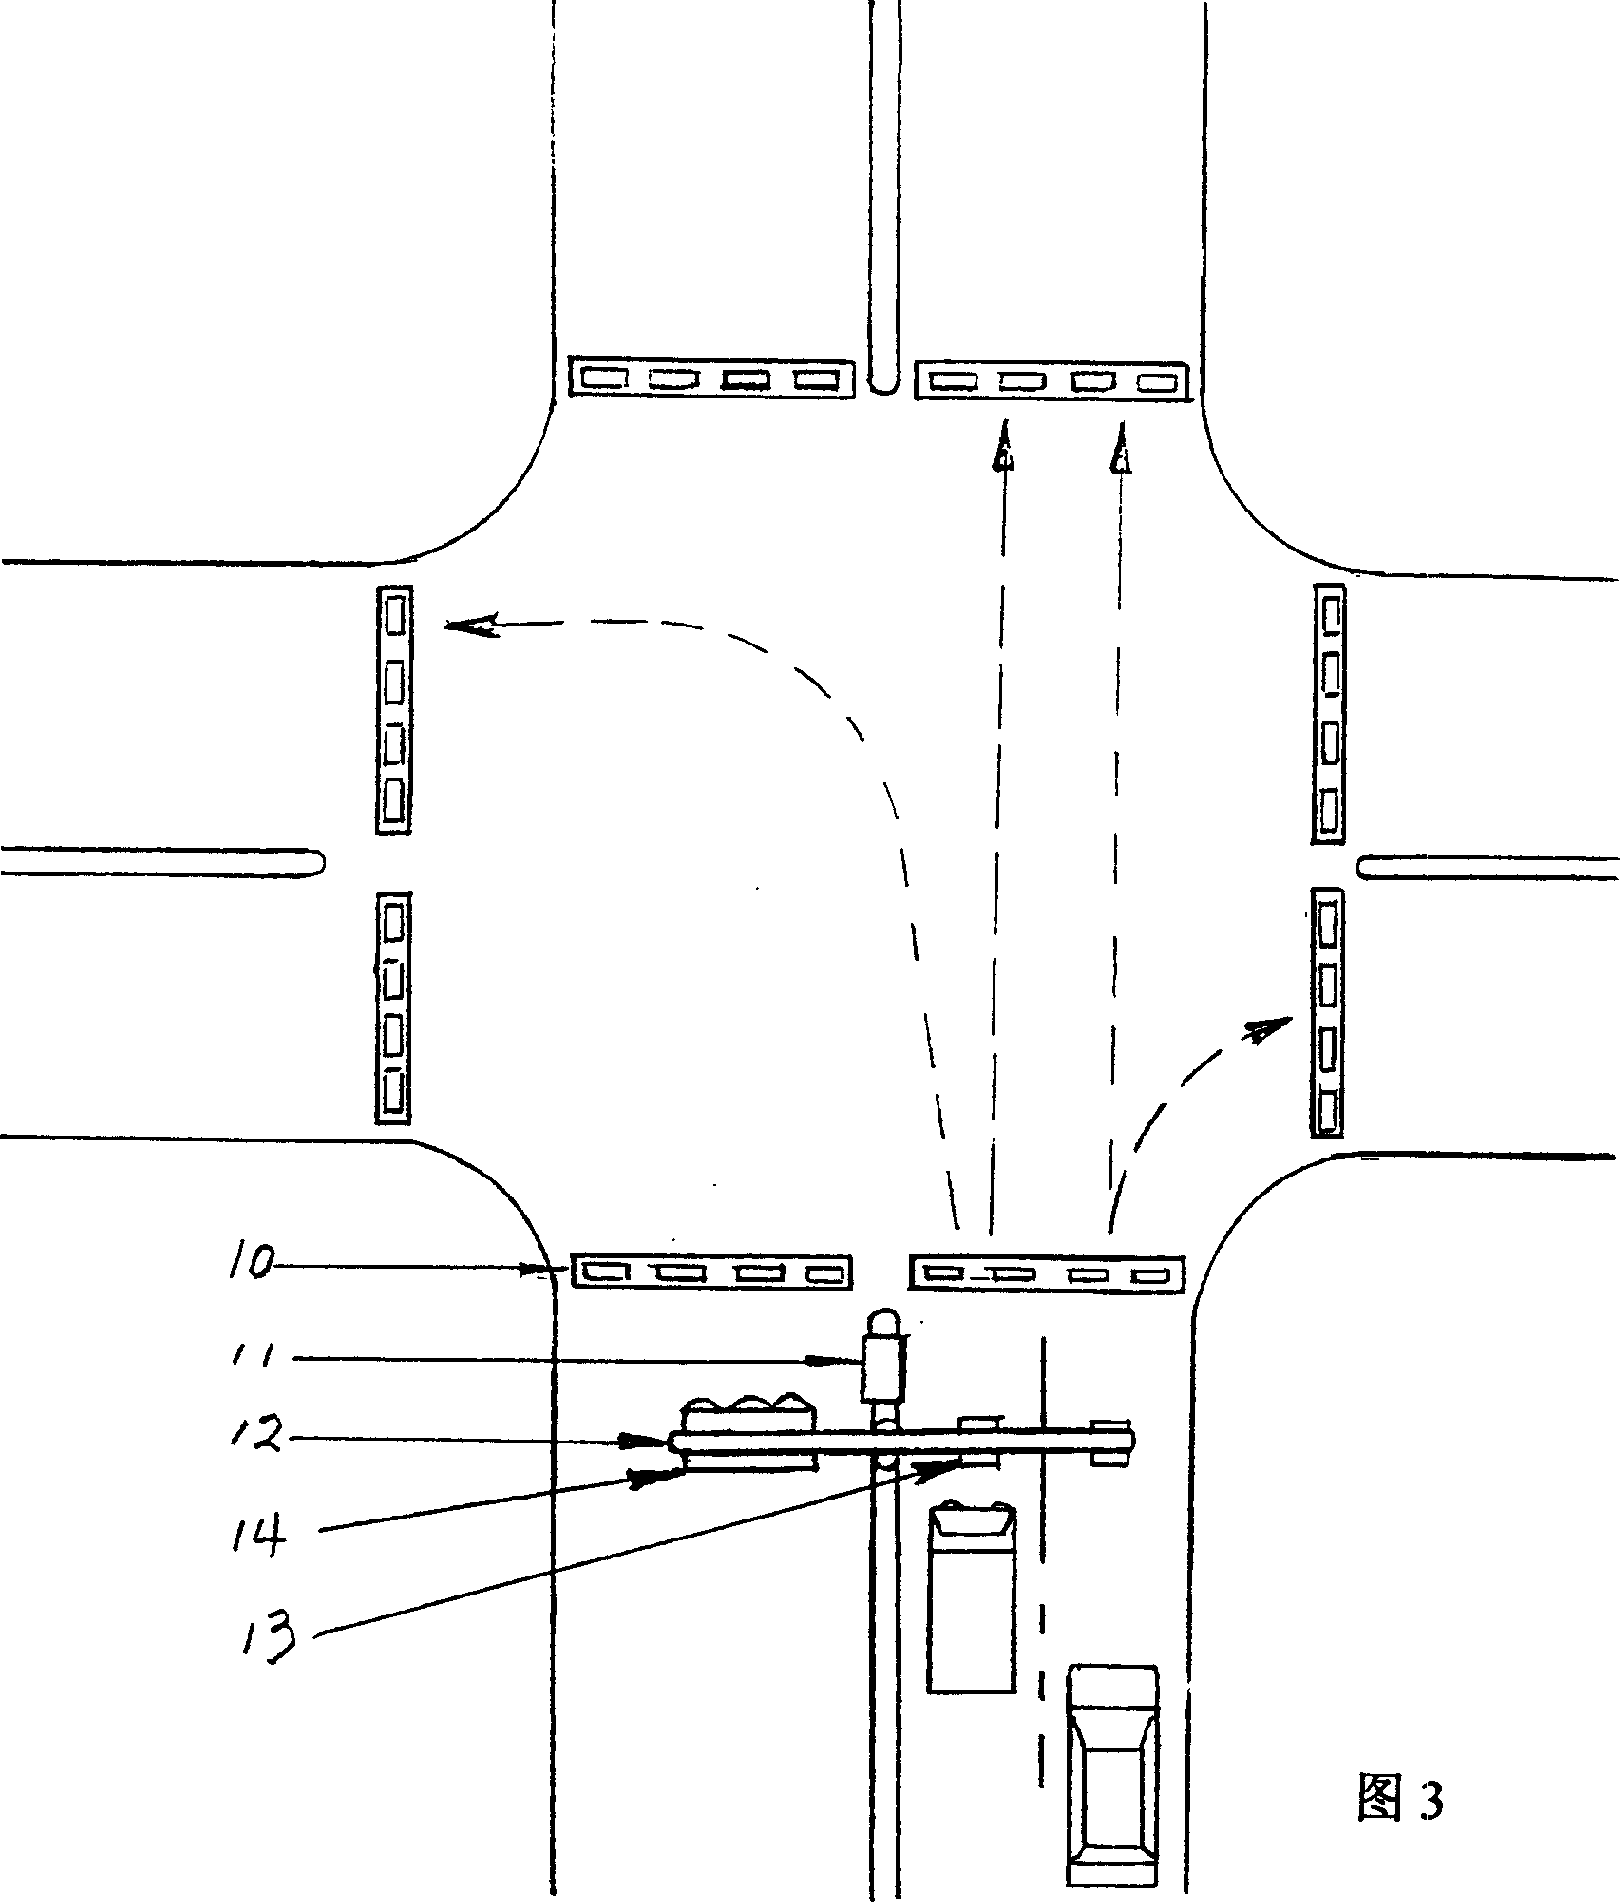 Traffic controlling system with microwave communicating apparatus